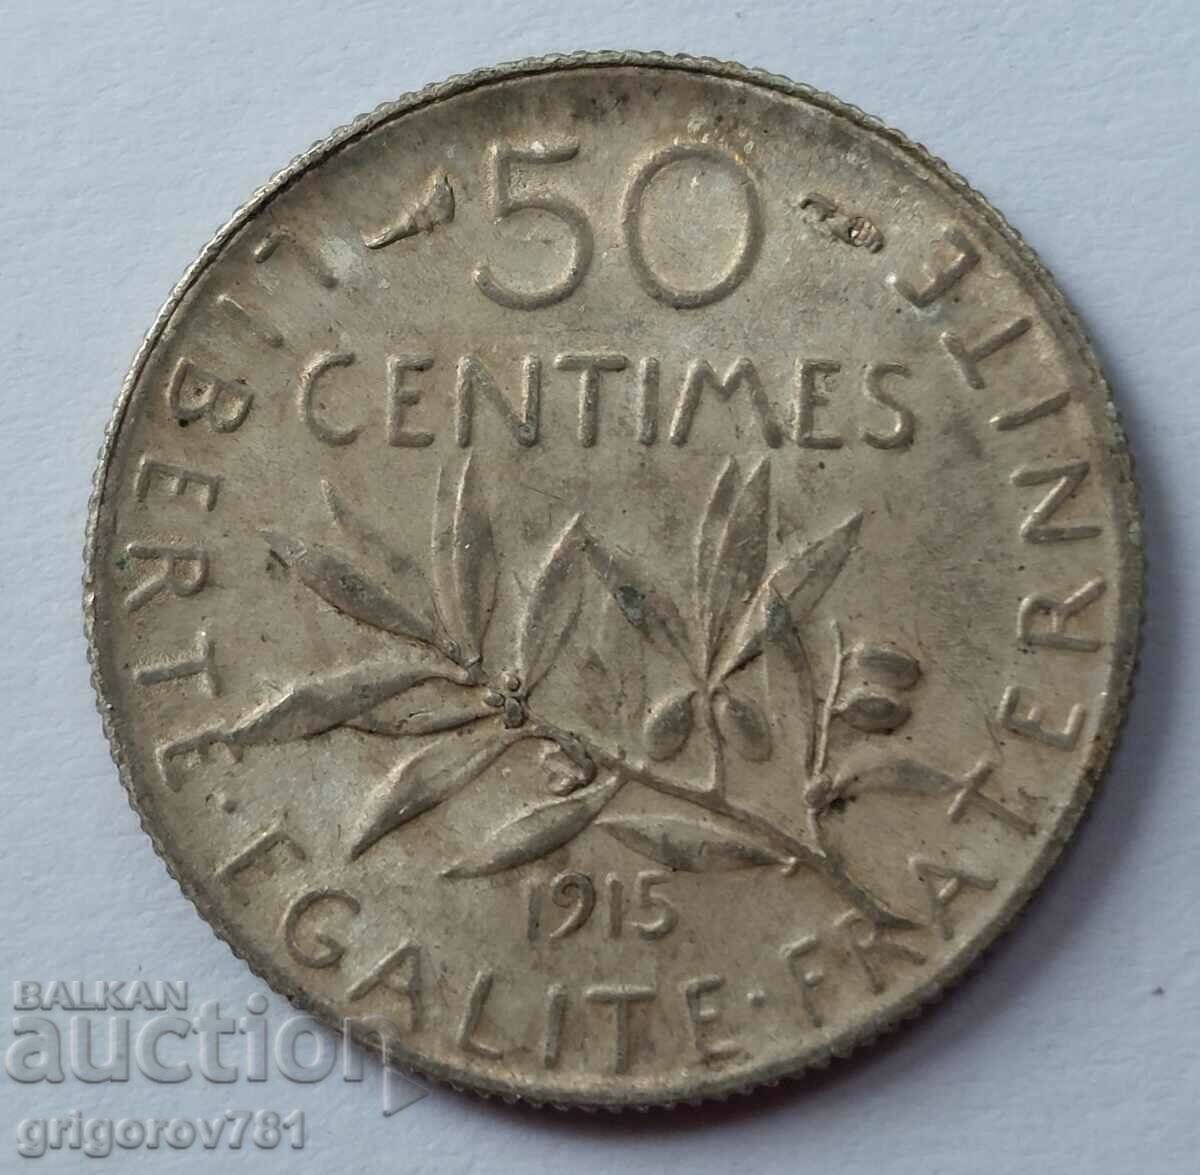 50 centimes silver France 1915 - silver coin №60